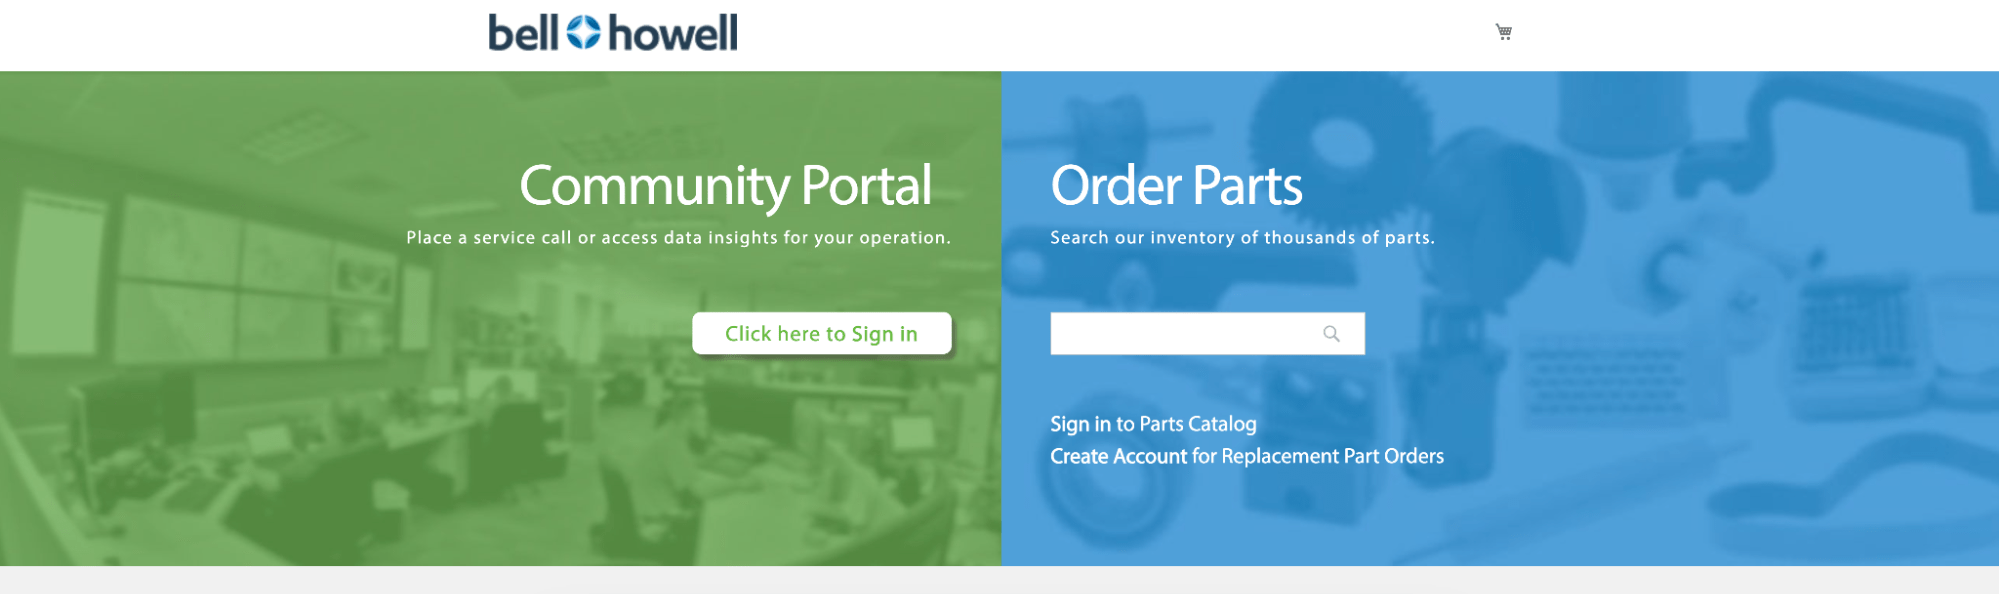 Bell and Howell Community Portal and Parts Page